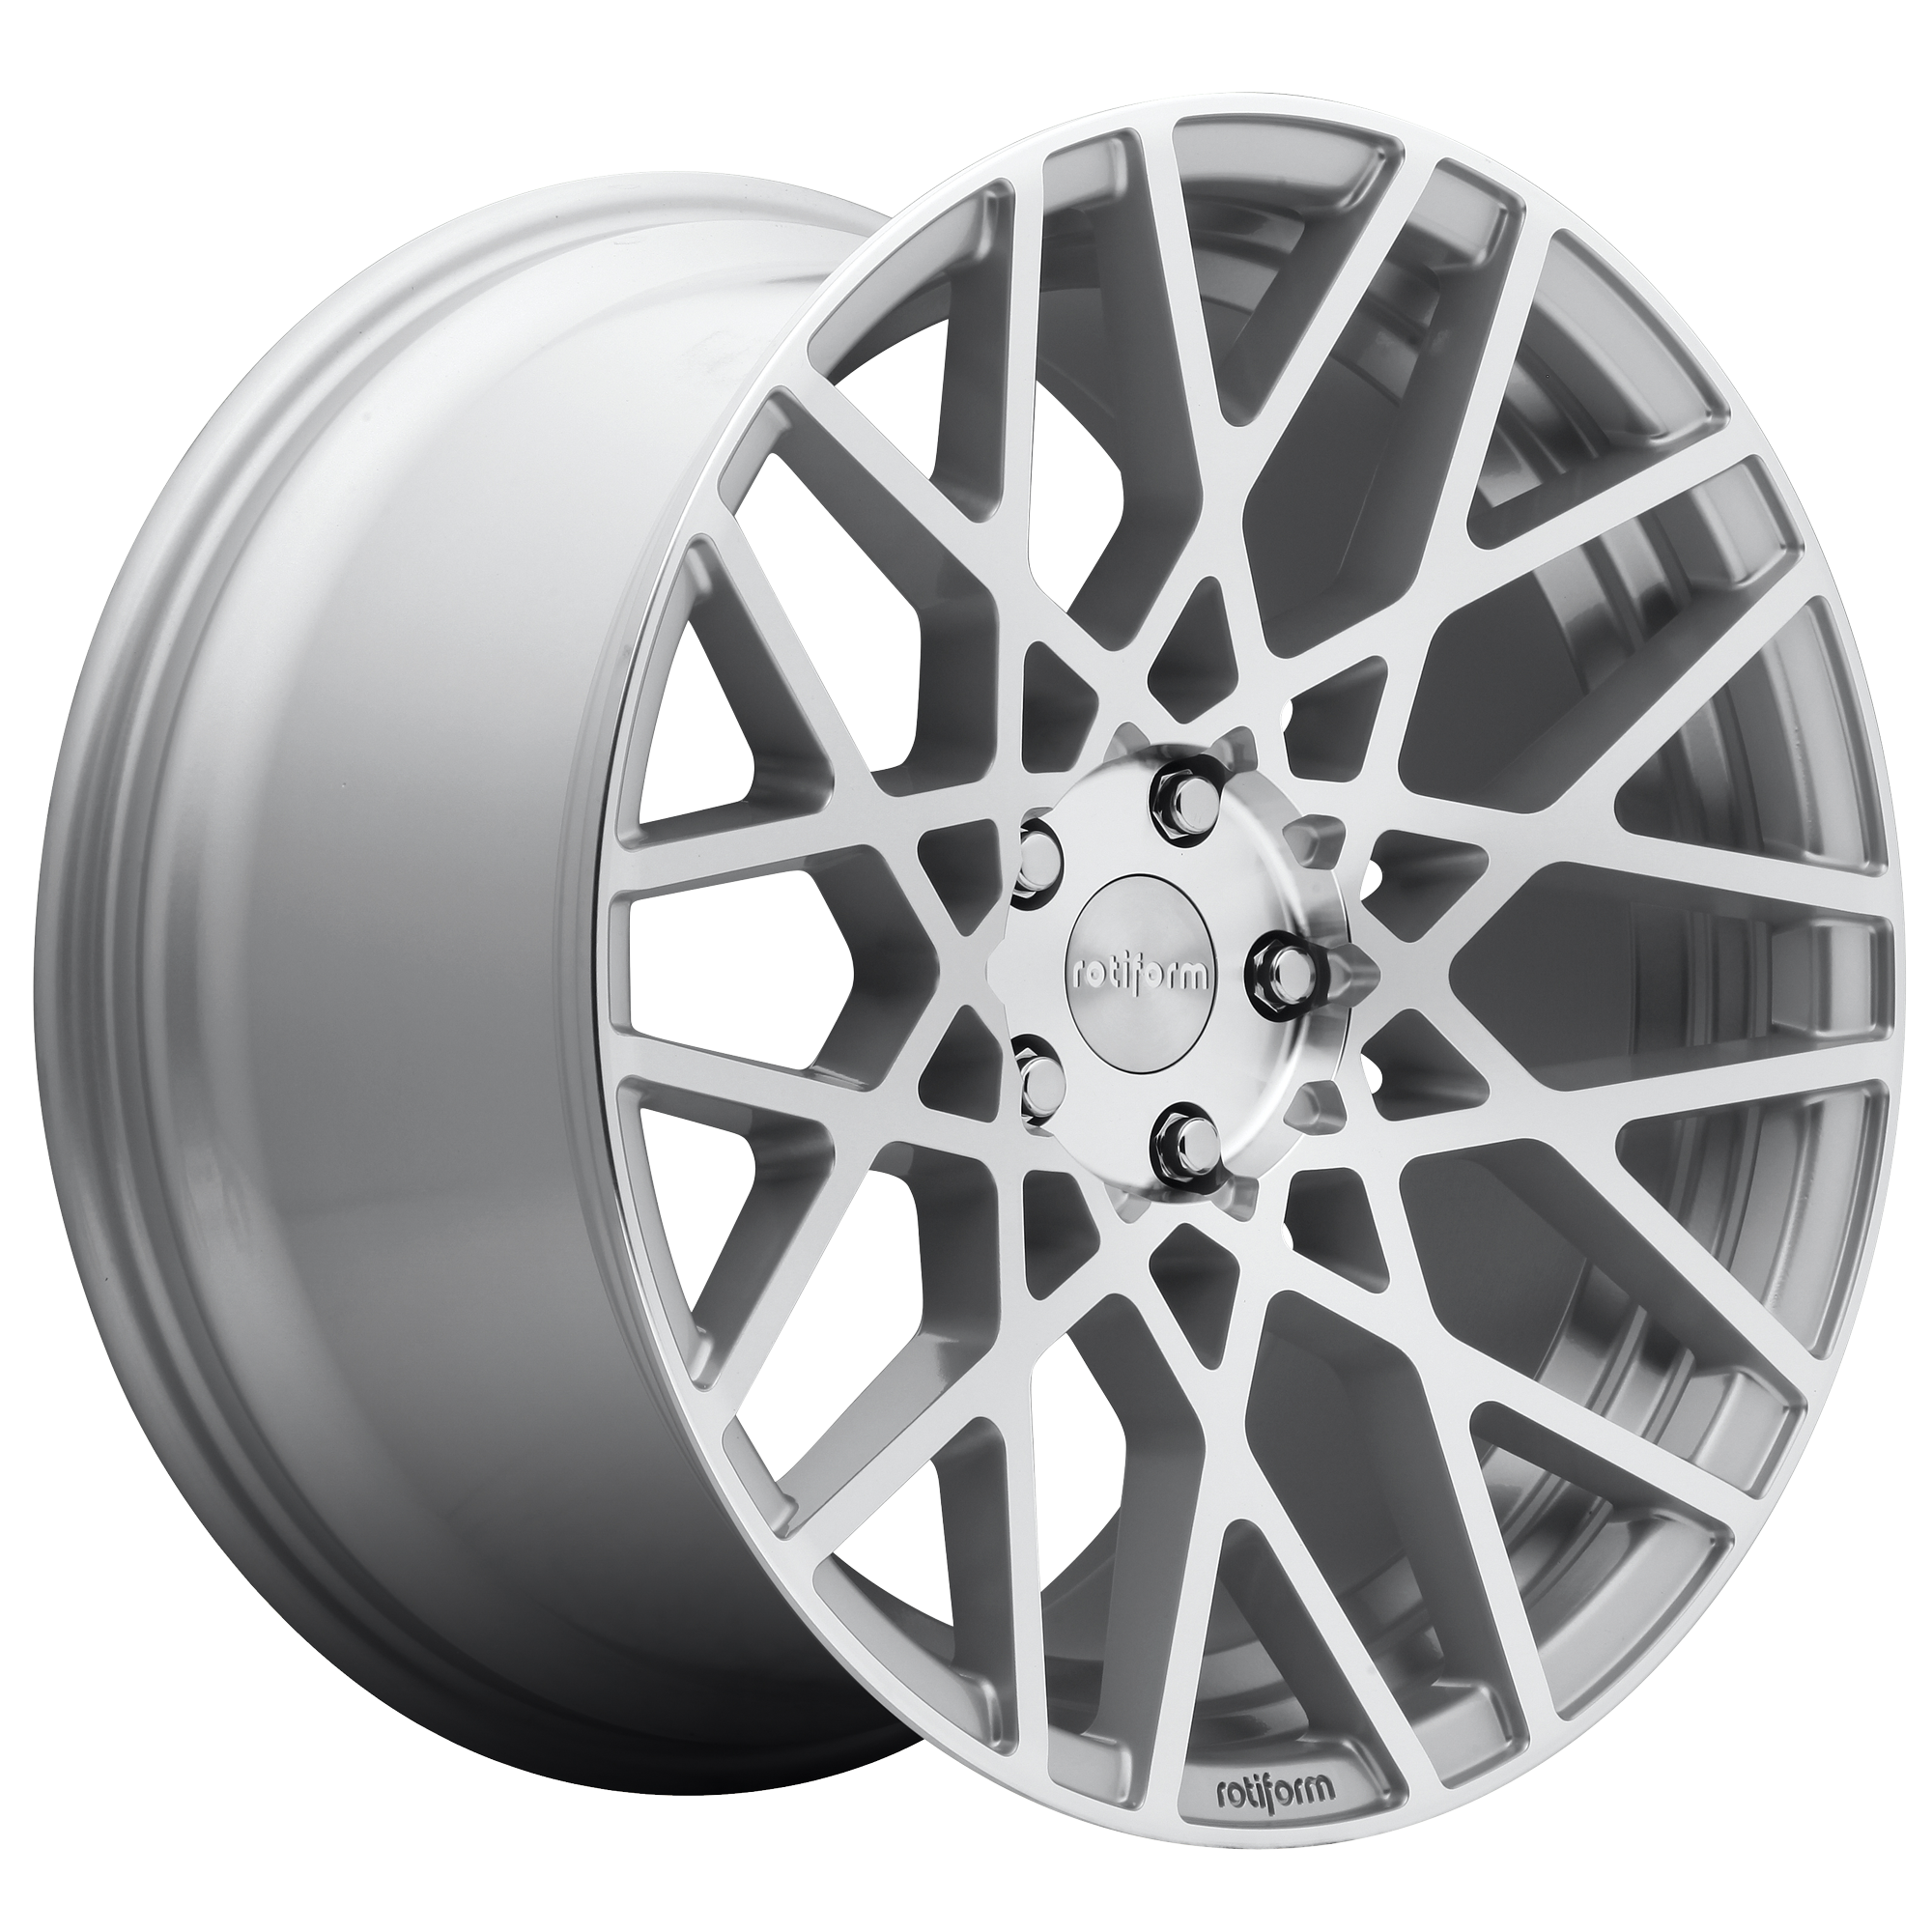 BLQ 18x8.5 5x114.30 GLOSS SILVER MACHINED (38 mm) - Tires and Engine Performance